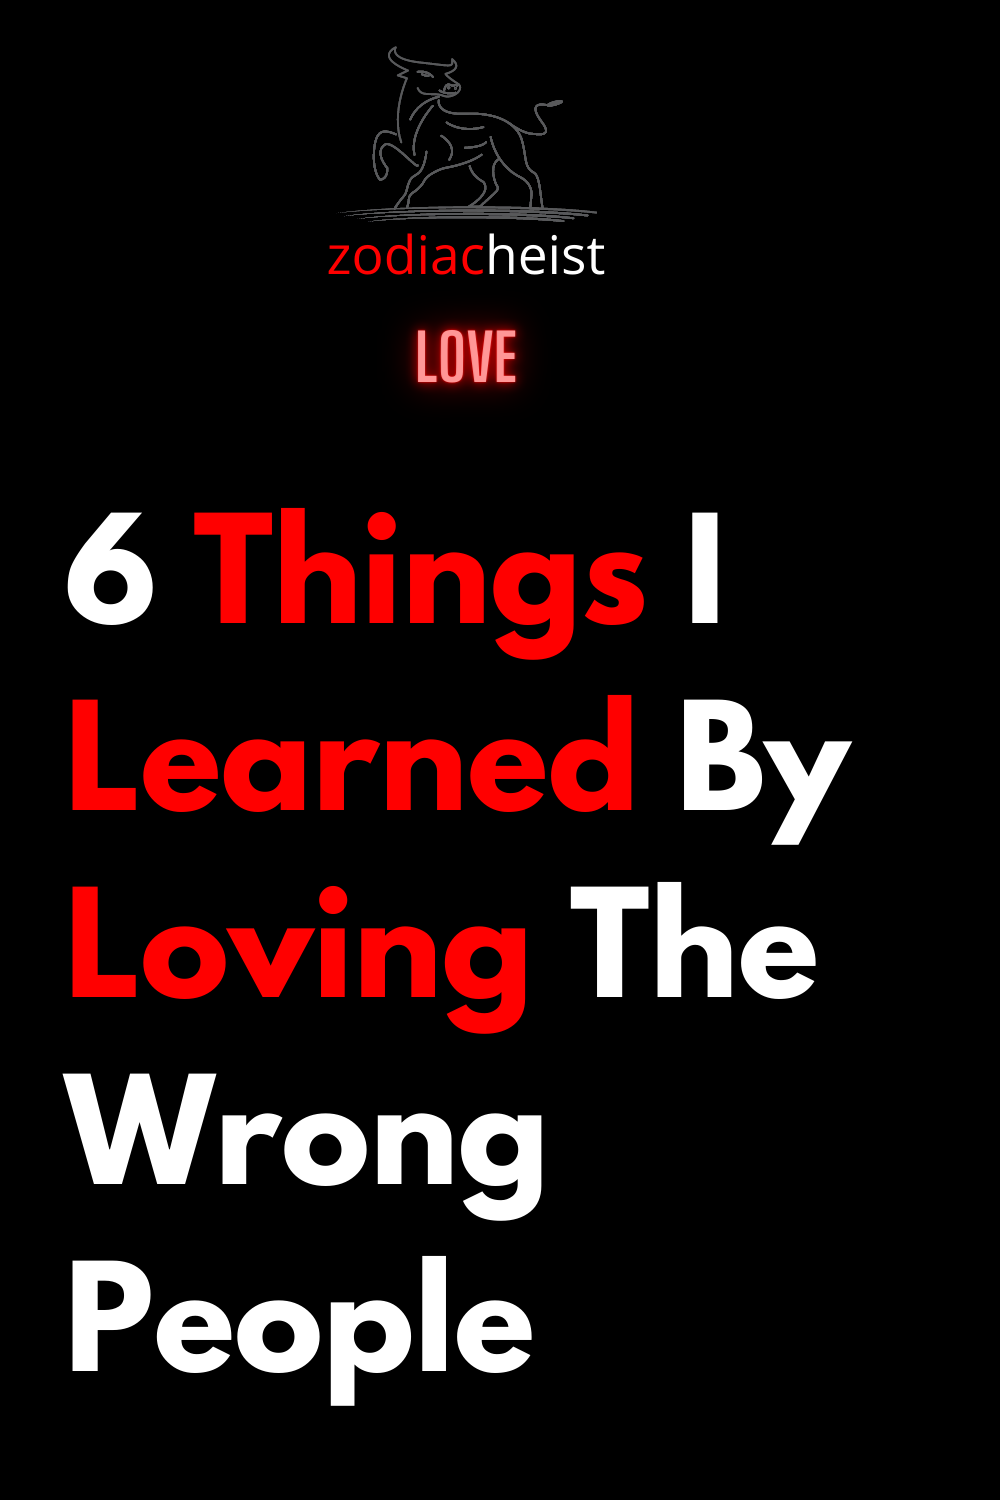 6 Things I Learned By Loving The Wrong People